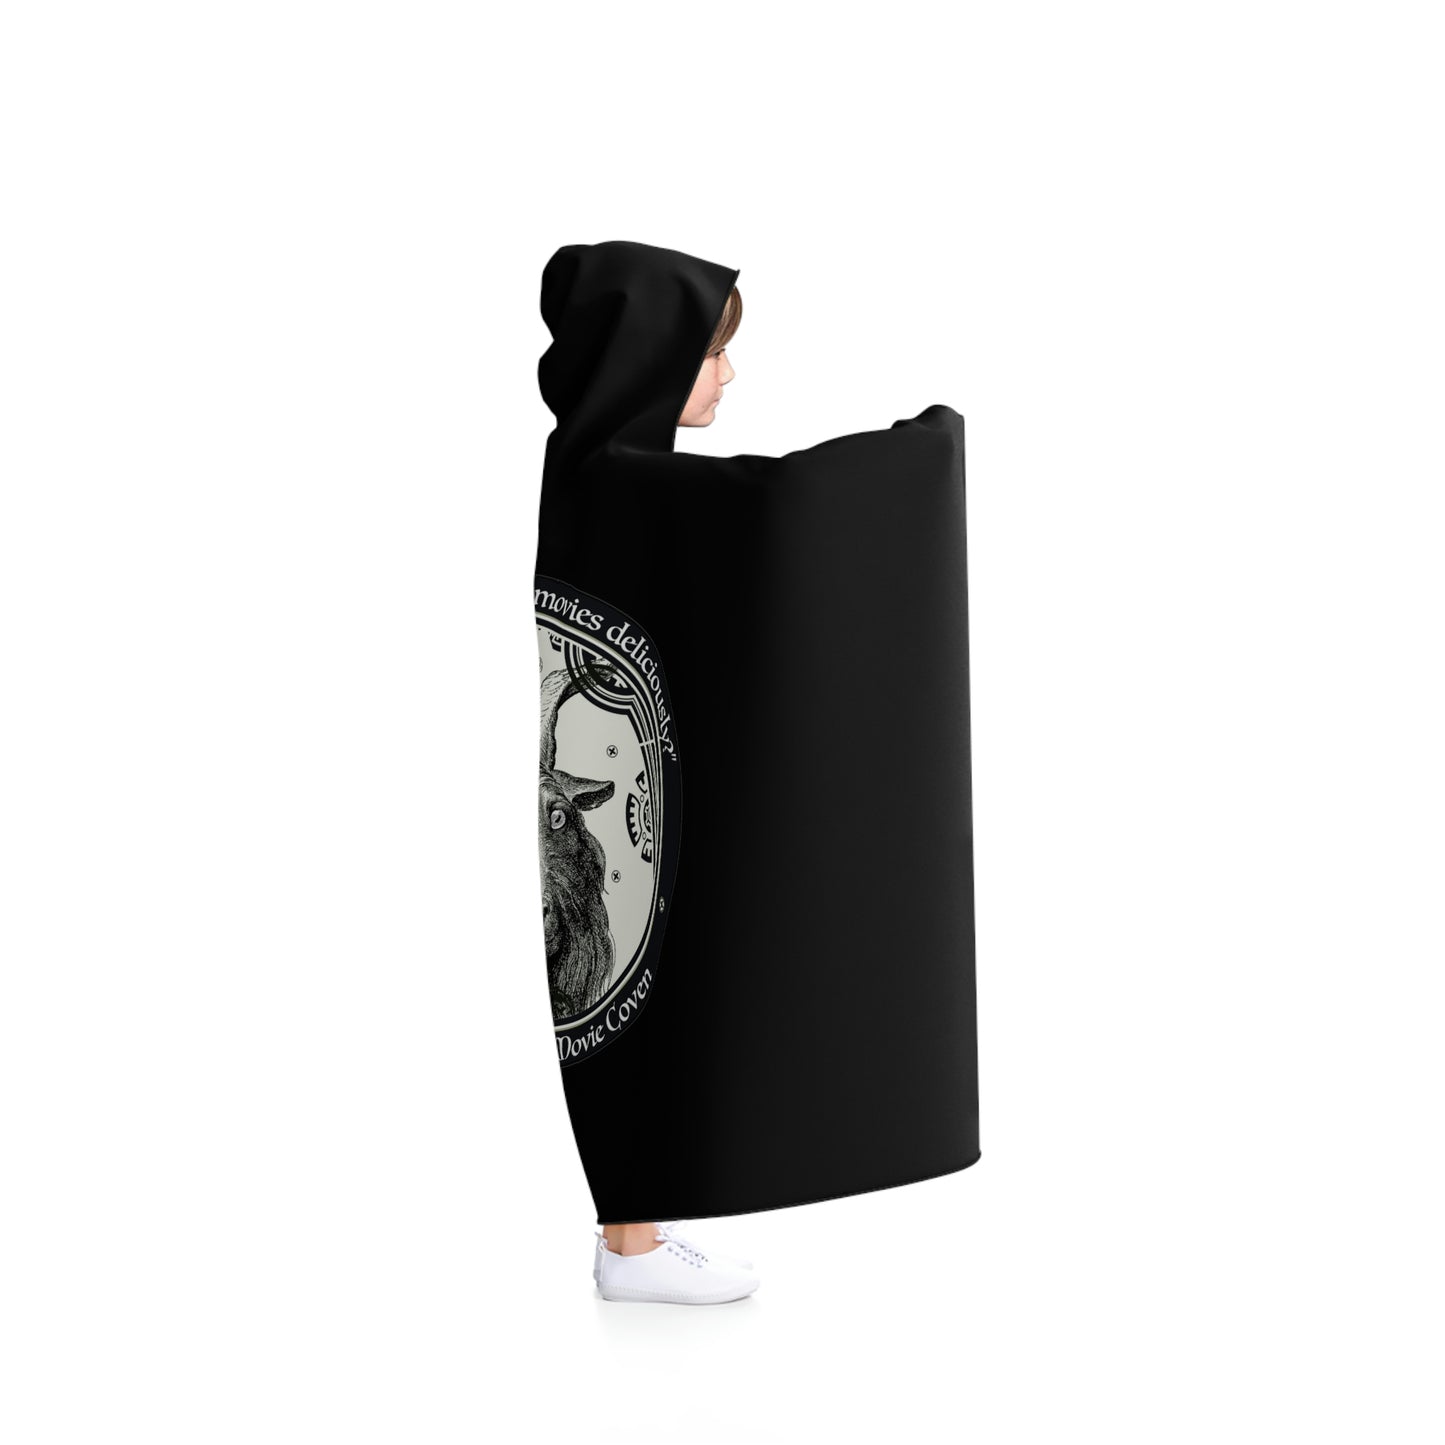 The Witch's Movie Coven Hooded Fleece Blanket